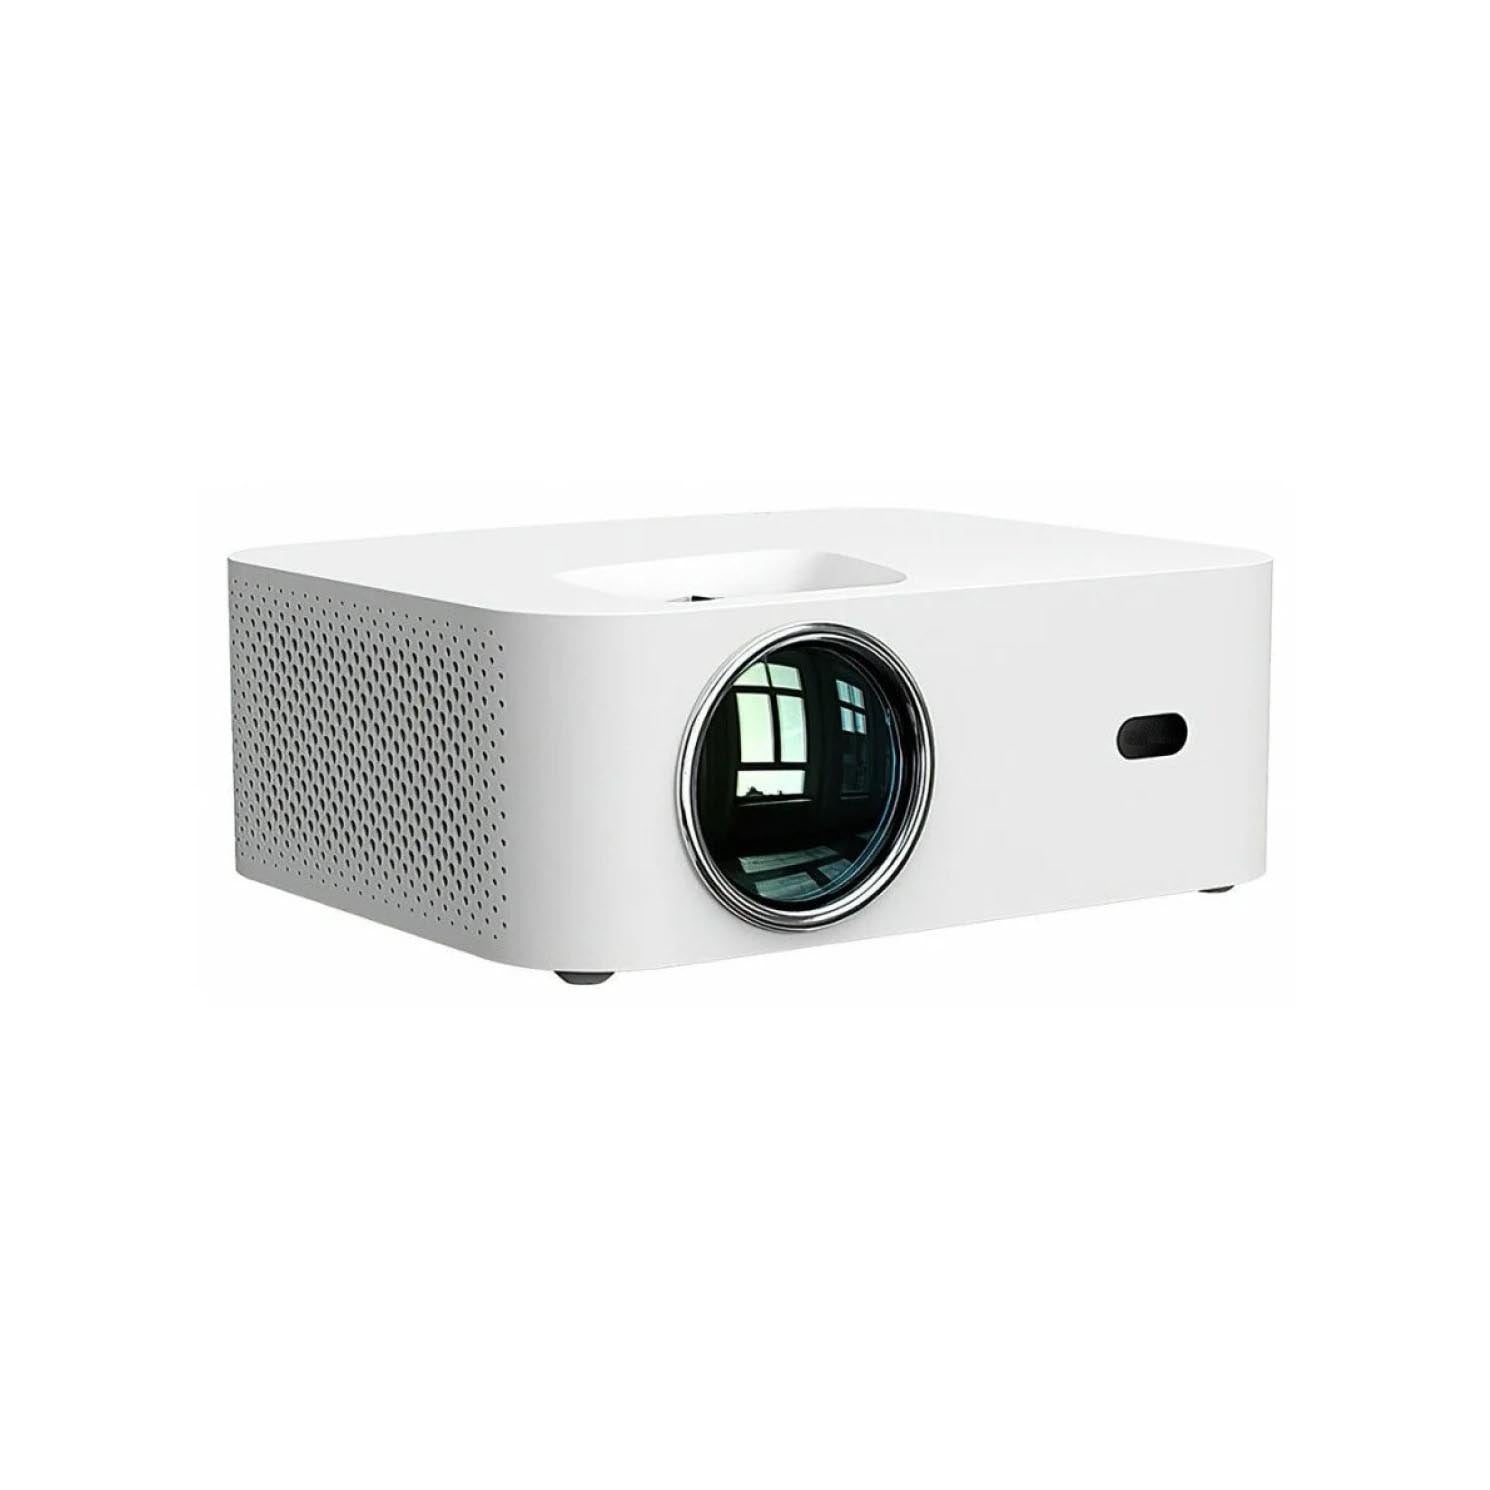 ProView Ultra-Short Throw Projector